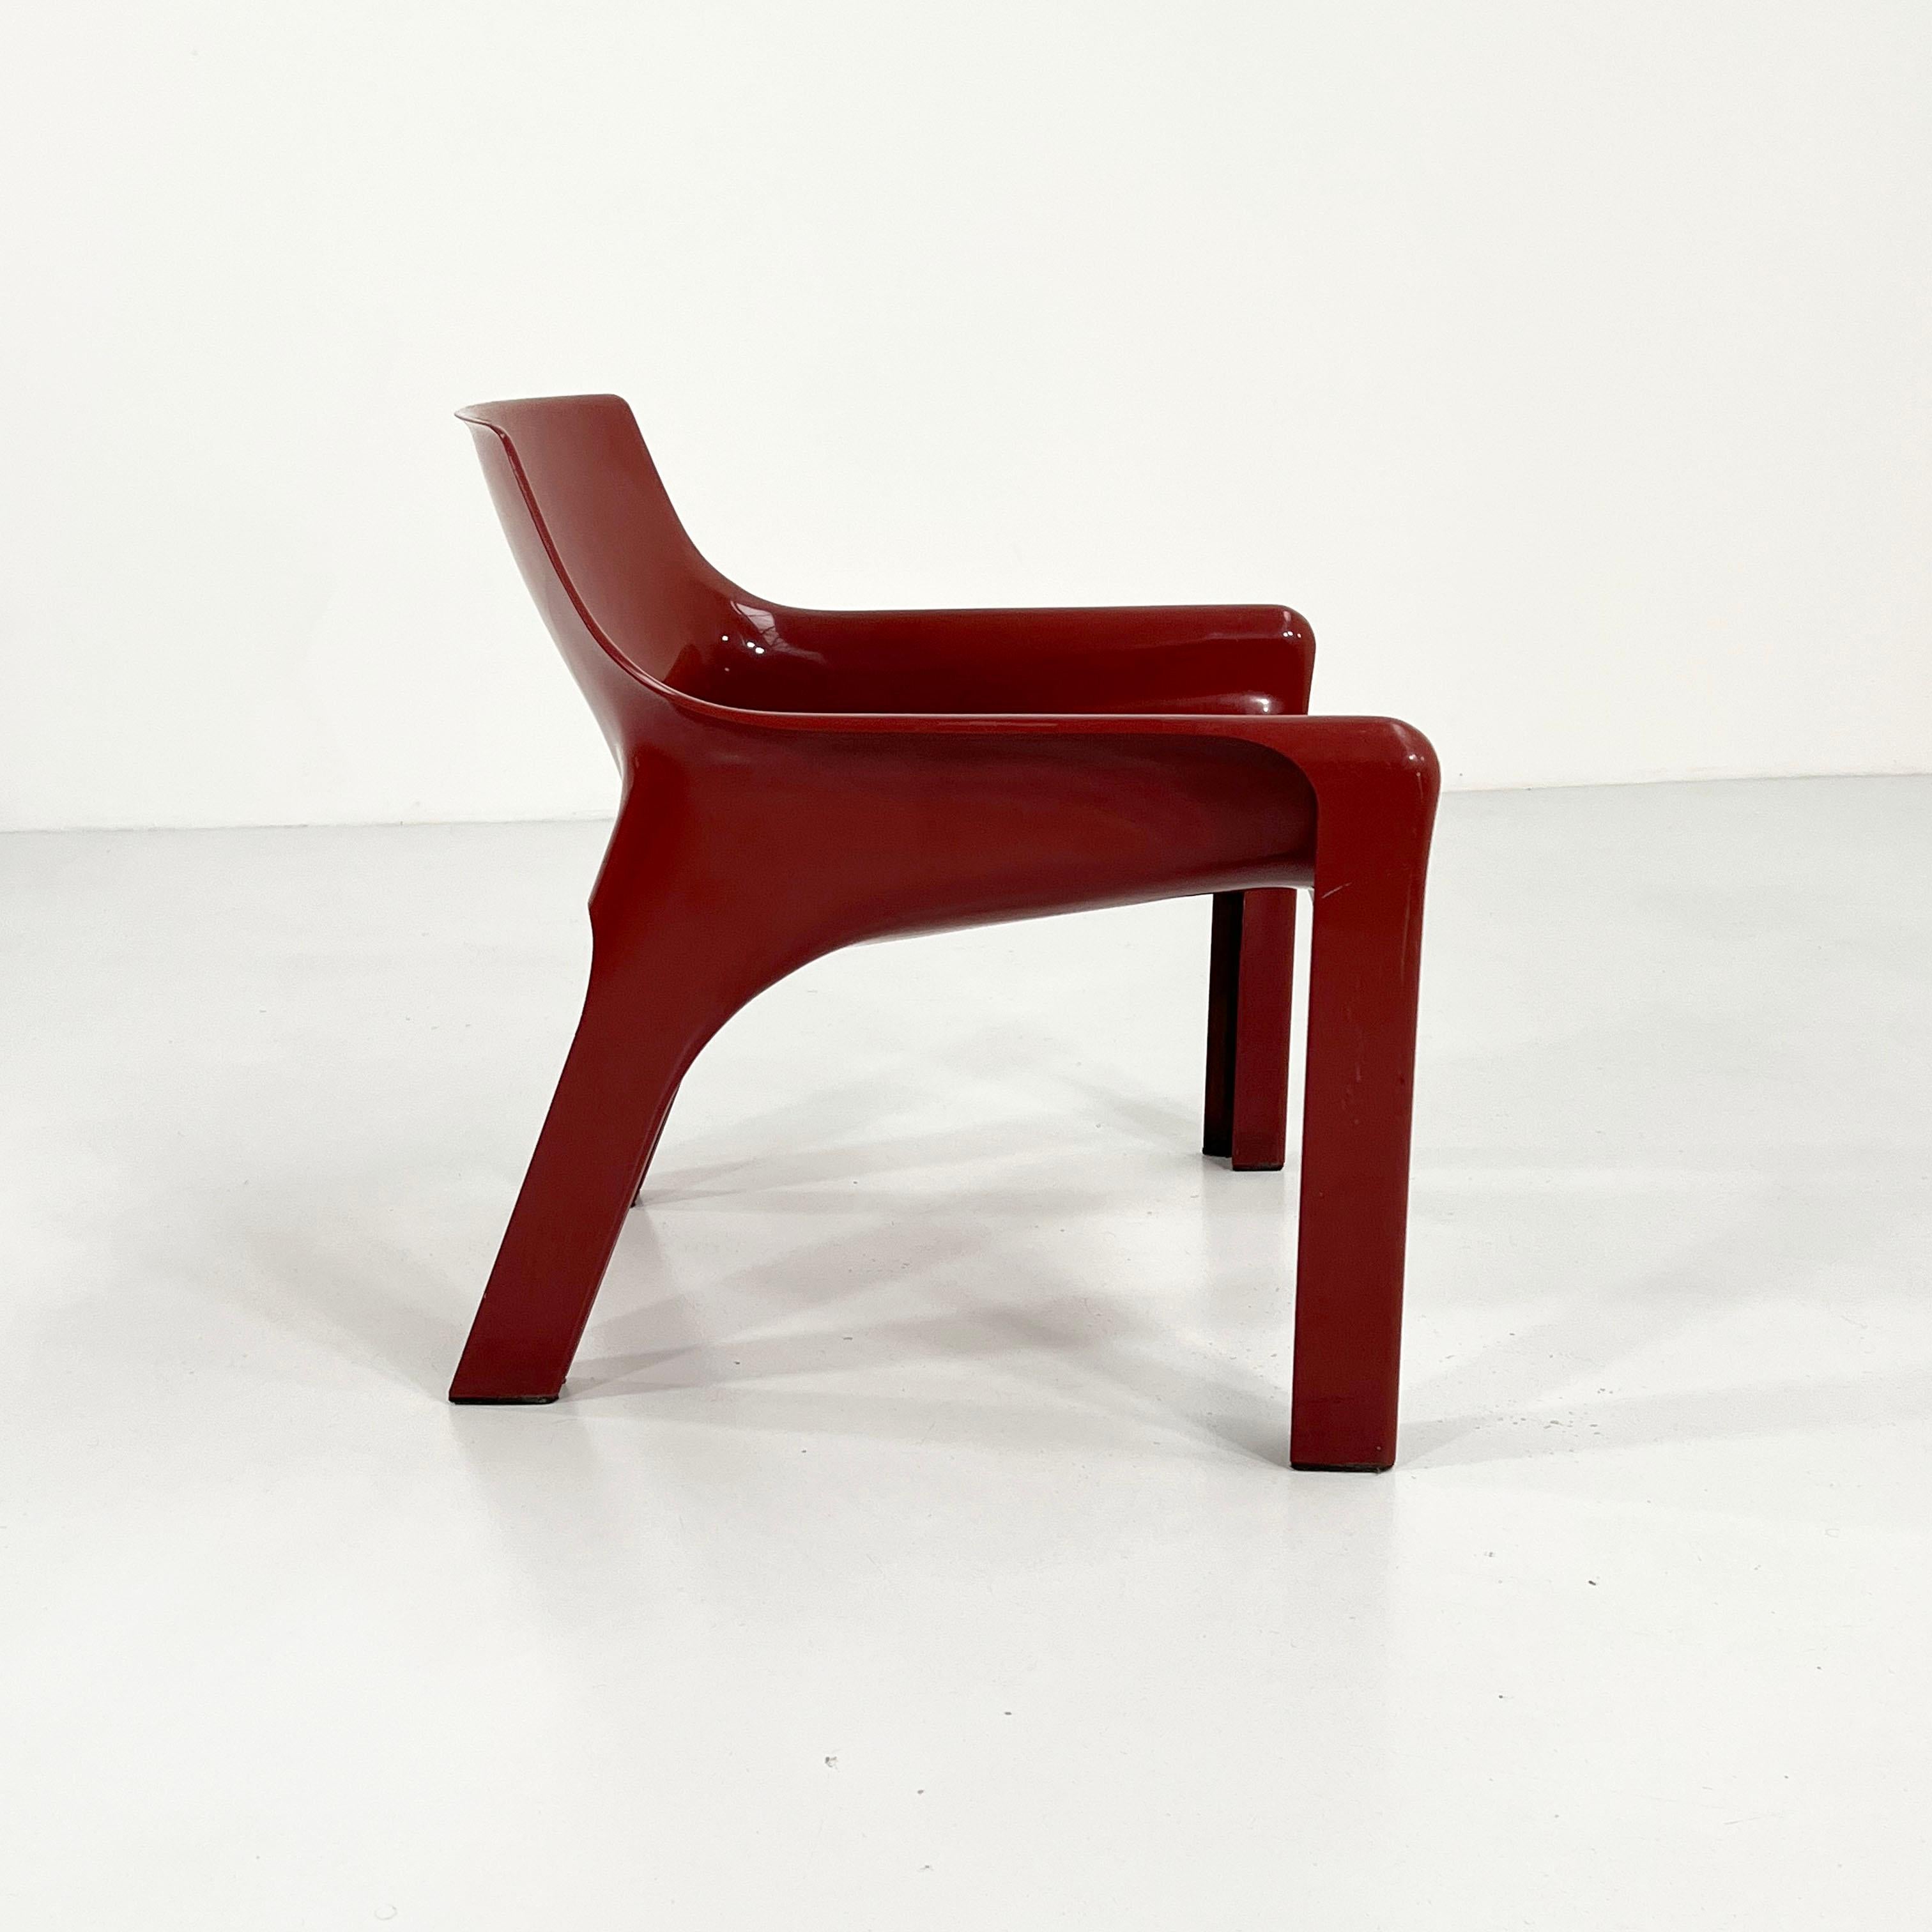 Italian Burgundy Vicario Lounge Chair by Vico Magistretti for Artemide, 1970s